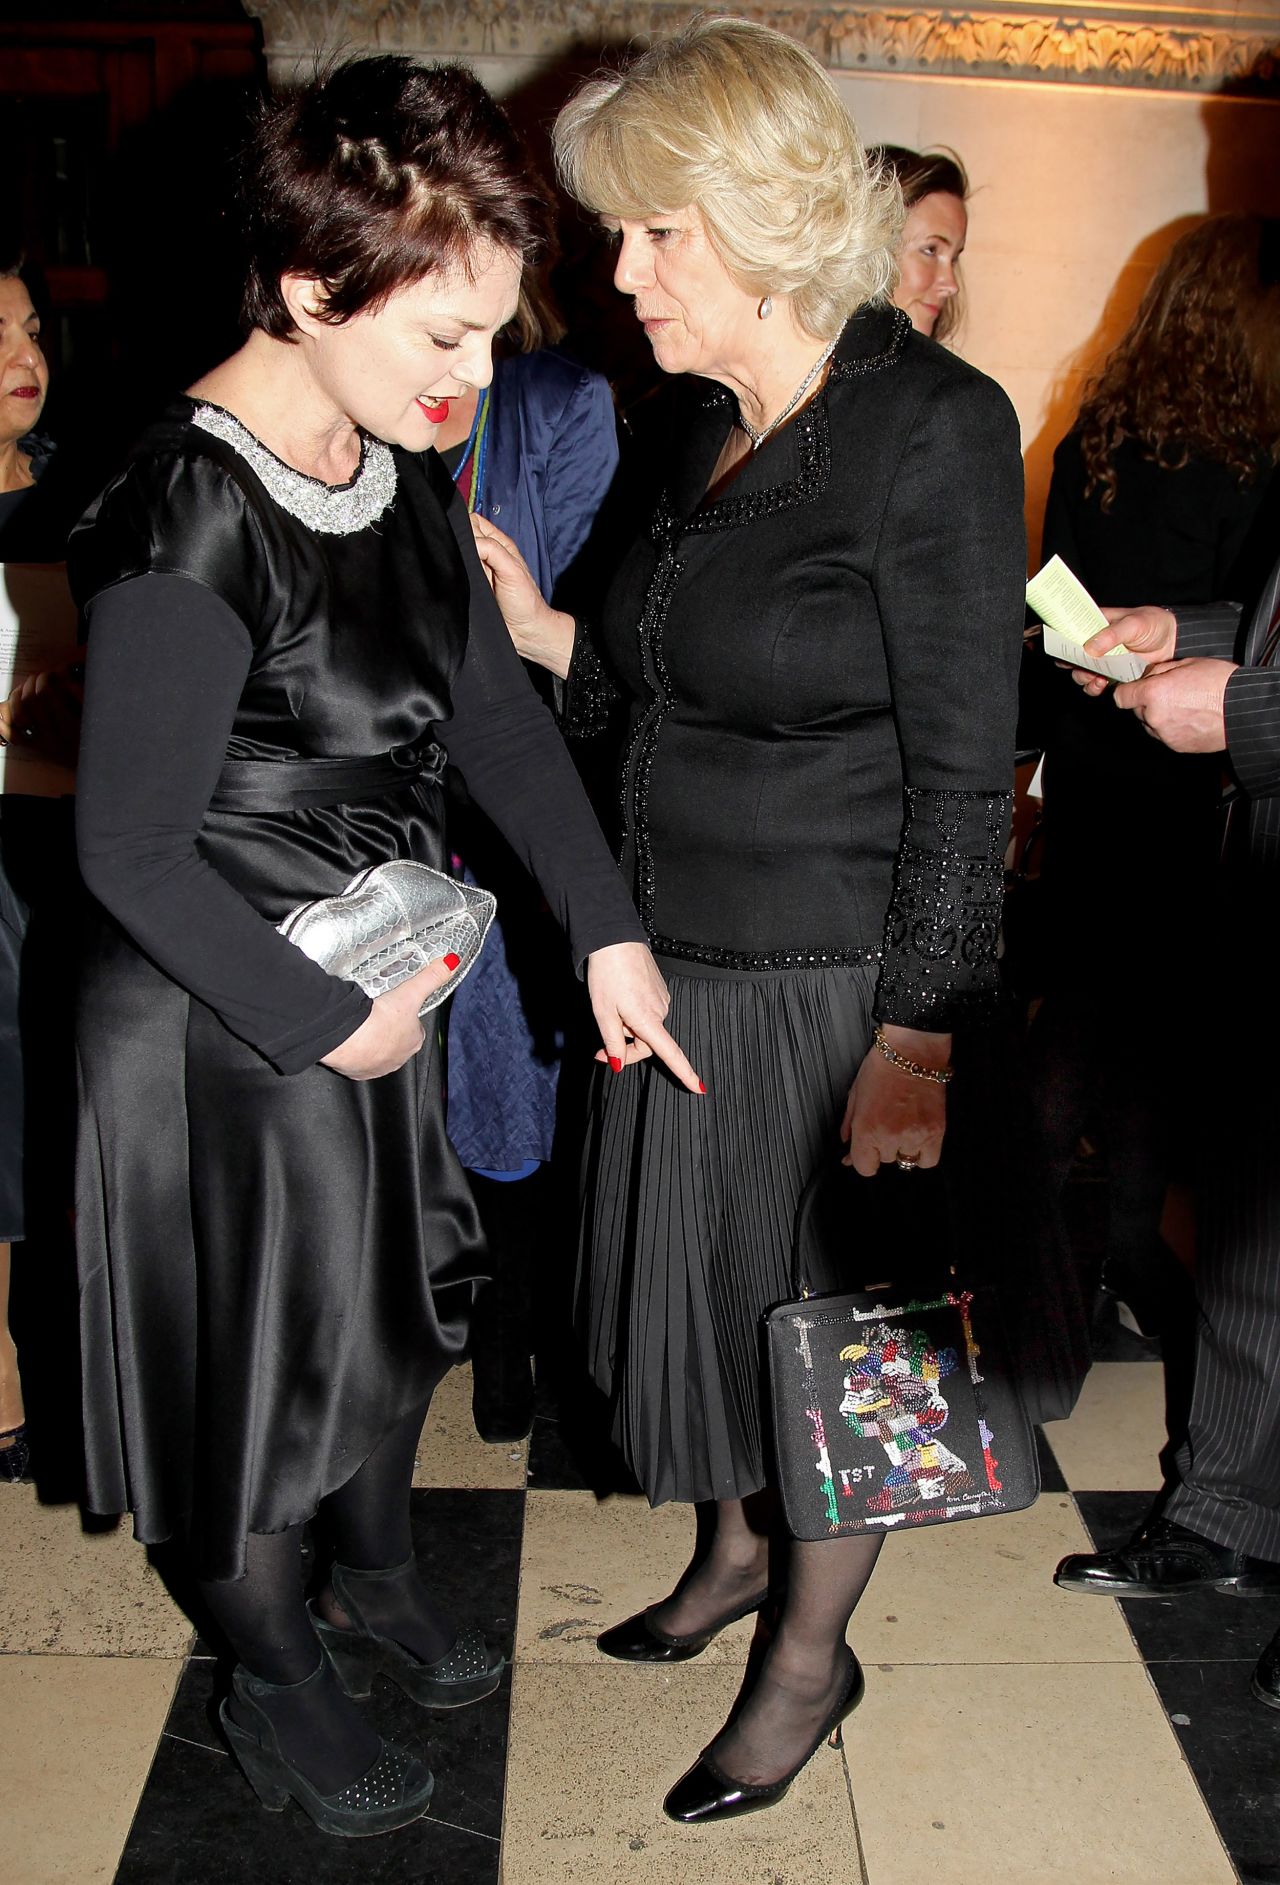 At the Royal Courts of Justice in 2010, Camilla met British designer Lulu Guinness. Guinness designed the black satin Jane bag worn by Camilla that evening. It featured a 1st Class stamp design embroidered in colorful sequins.